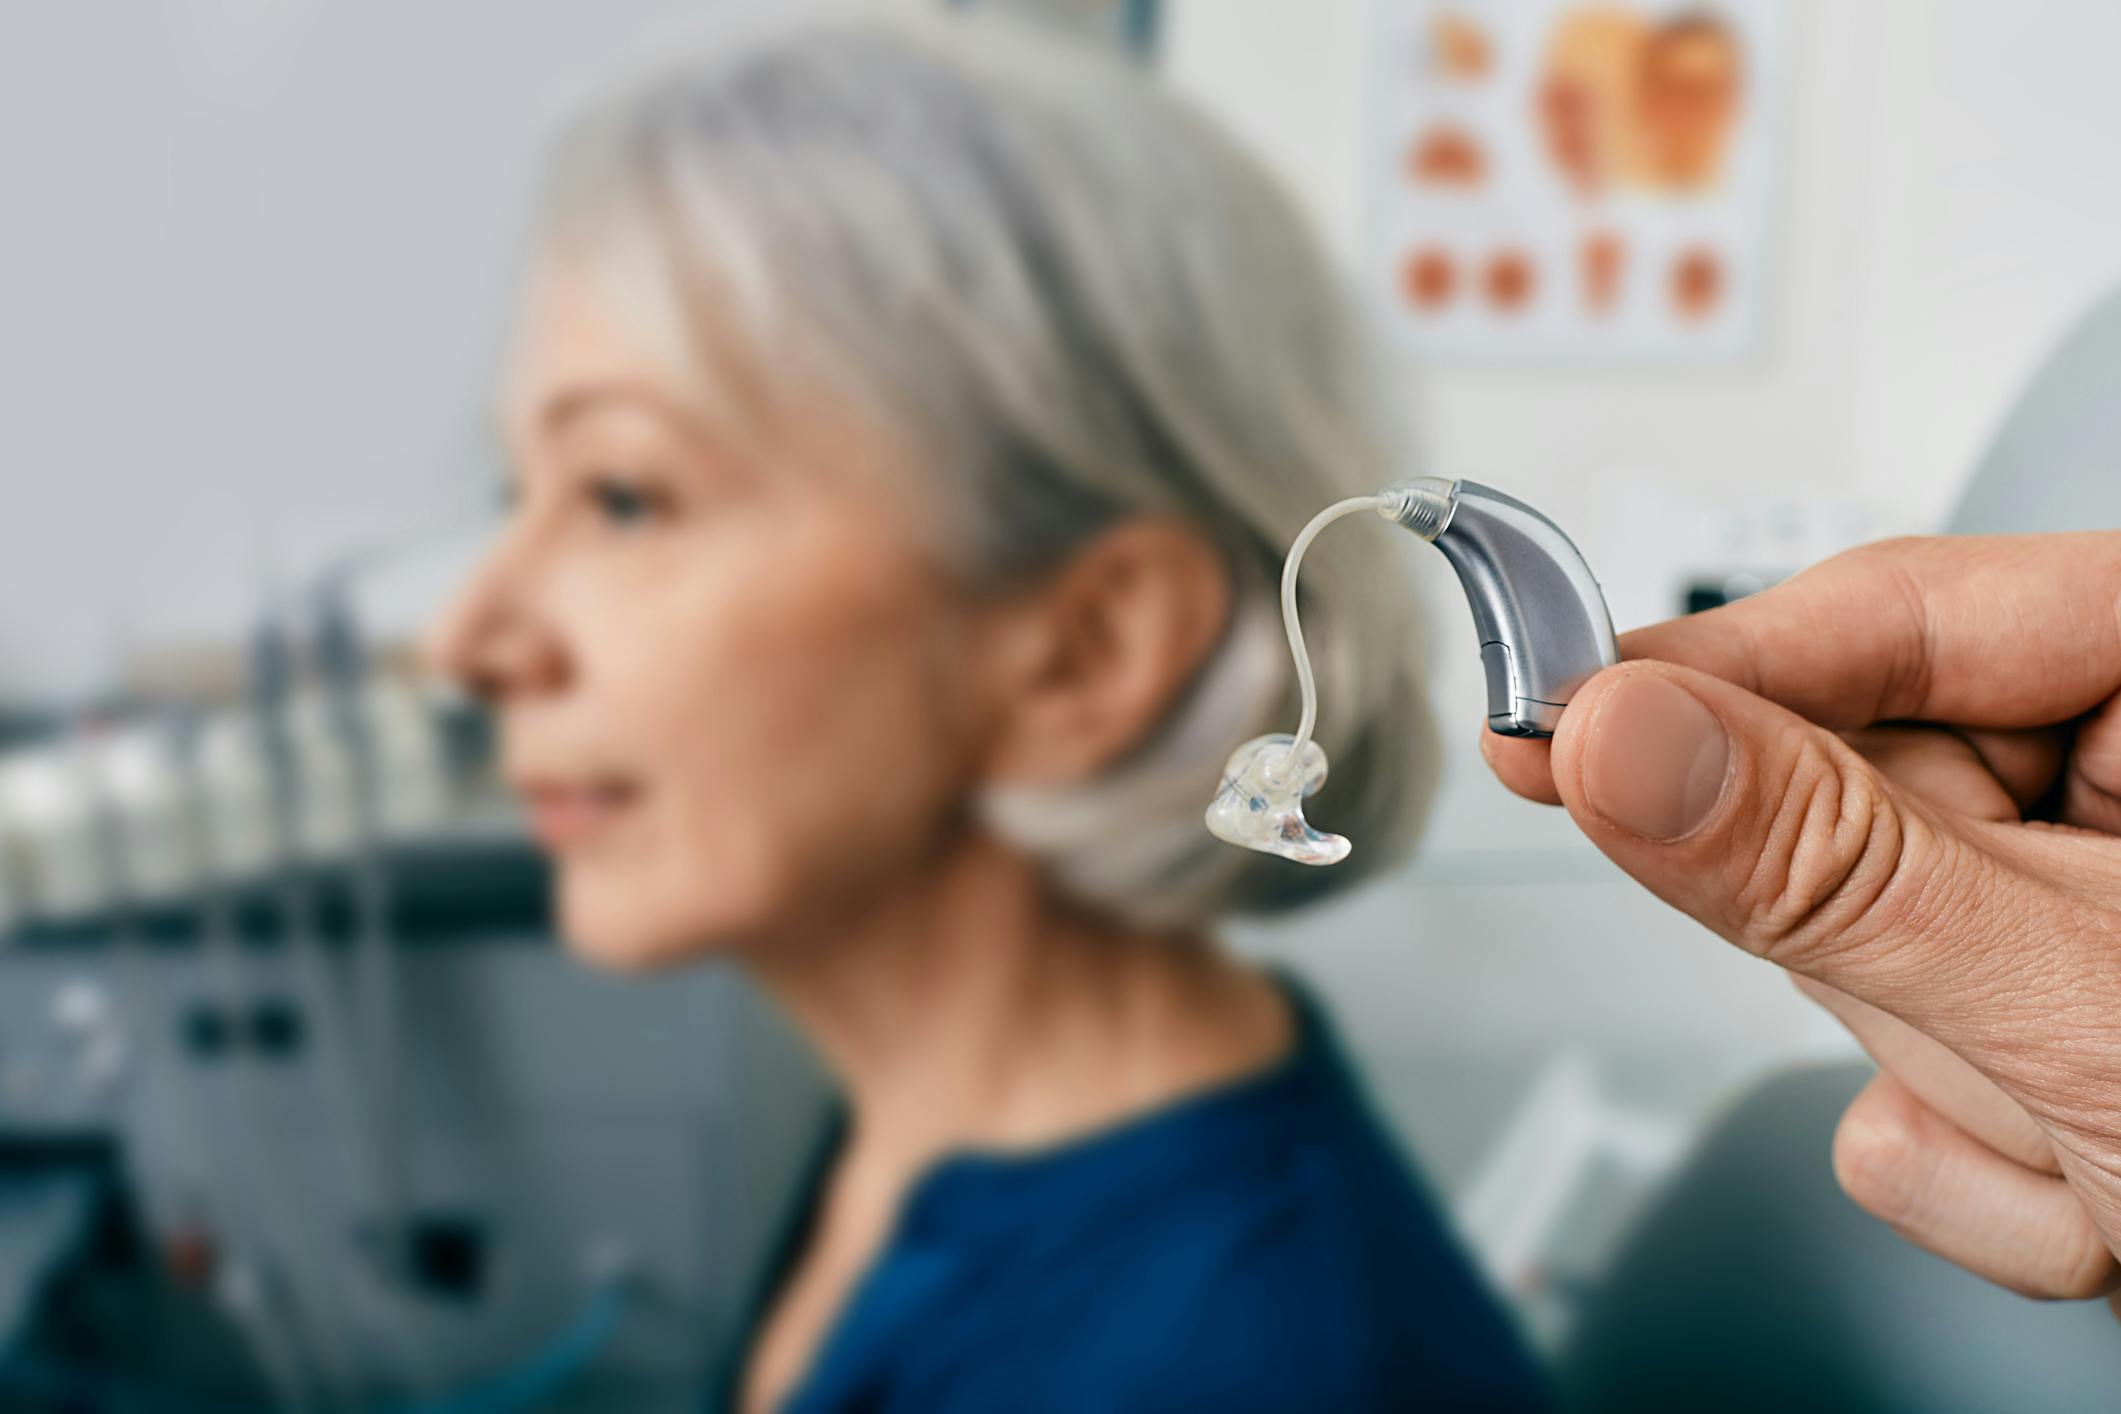 hearing aid being held up next to a woman